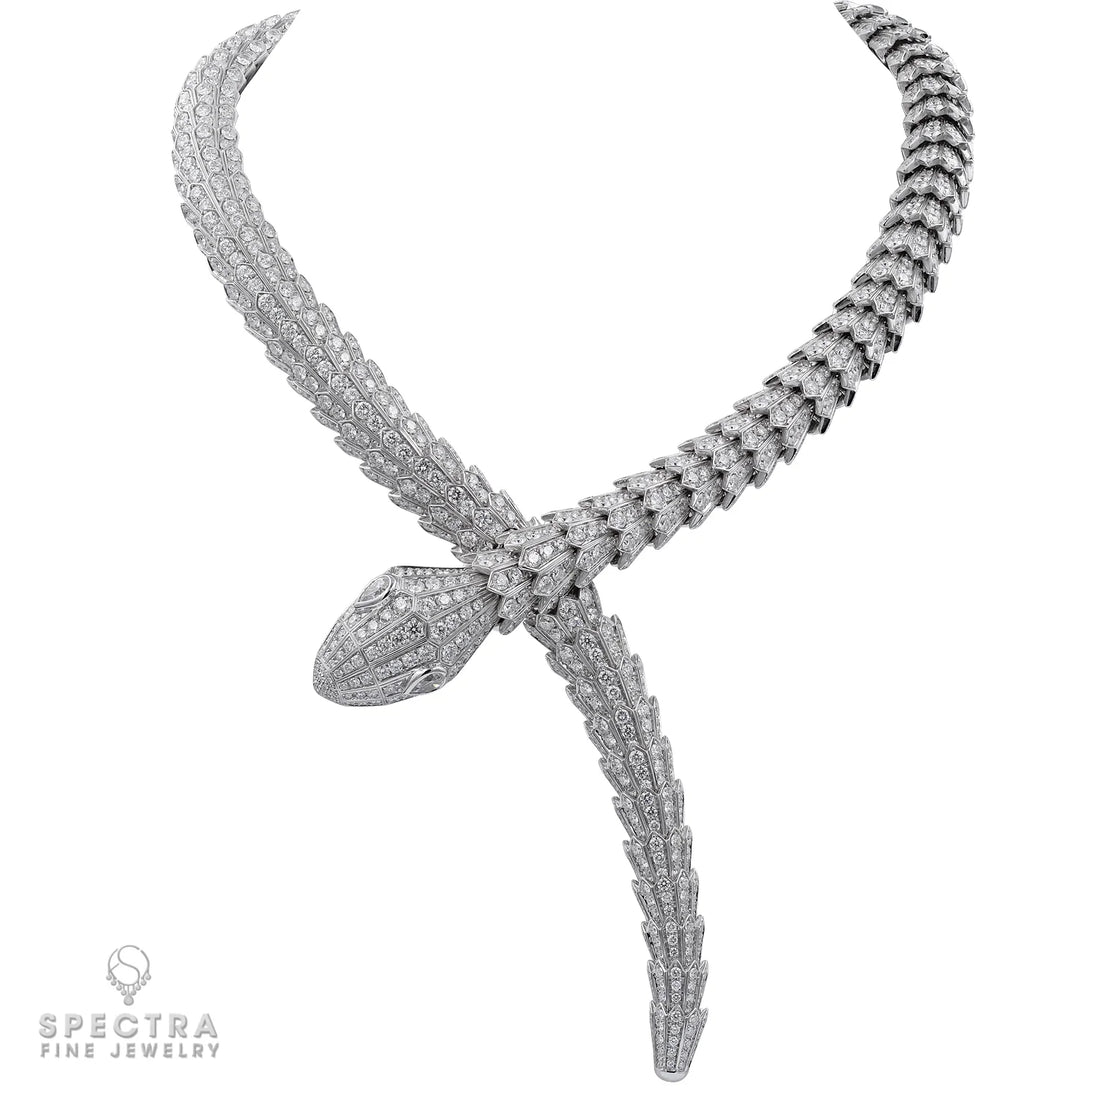 The Best Jewelry Worn on the Red Carpet: A Spectra Fine Jewelry Showcase